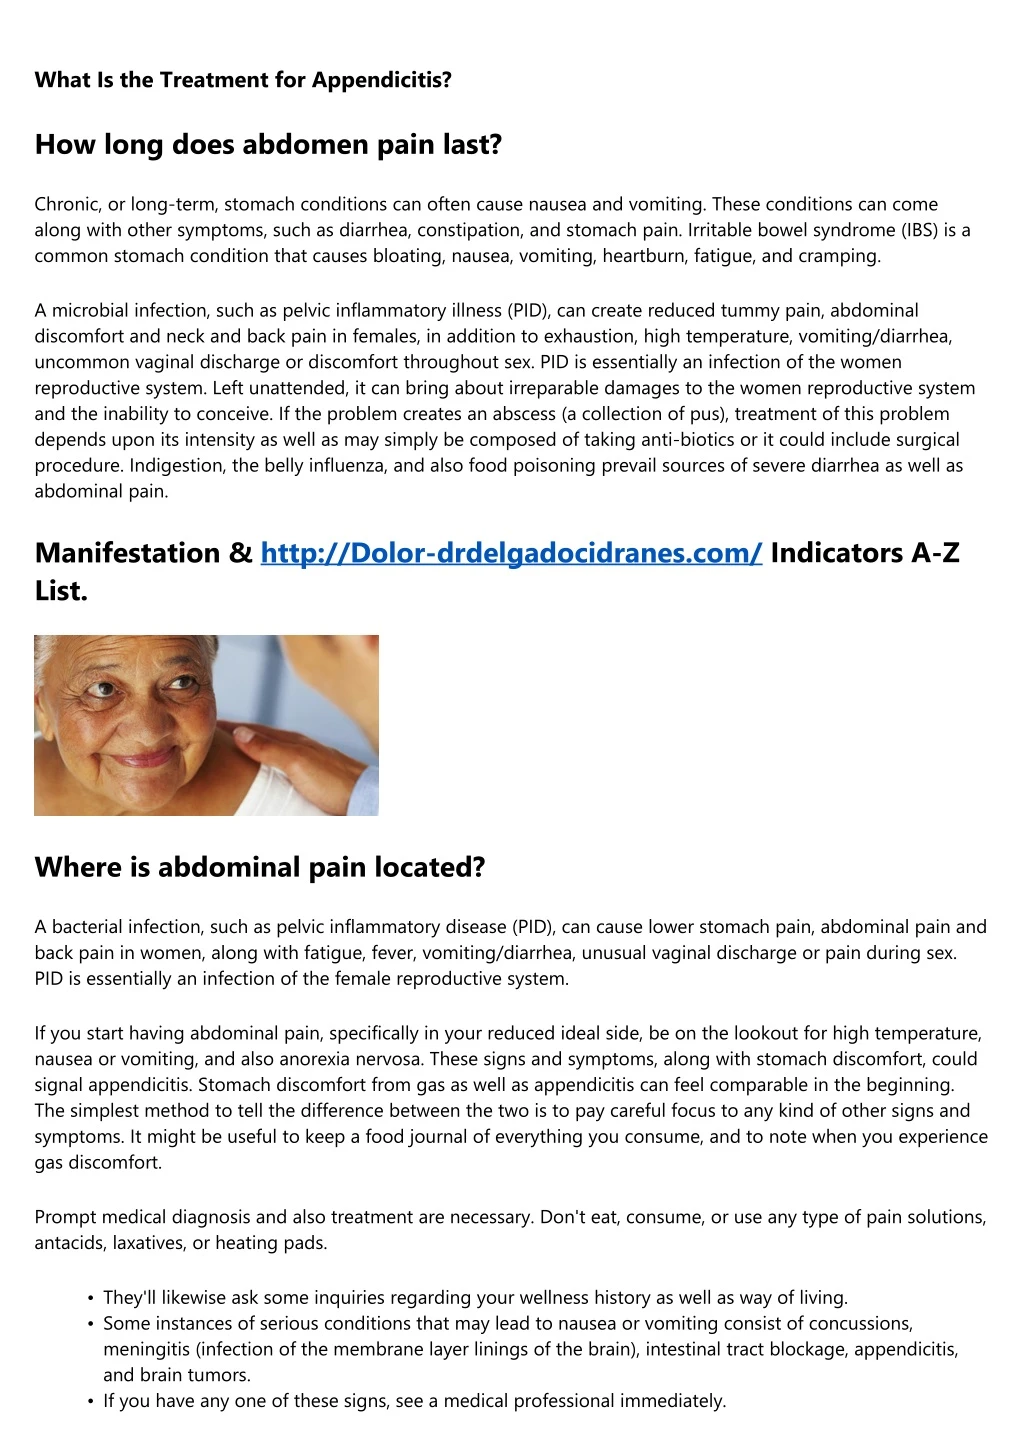 what is the treatment for appendicitis